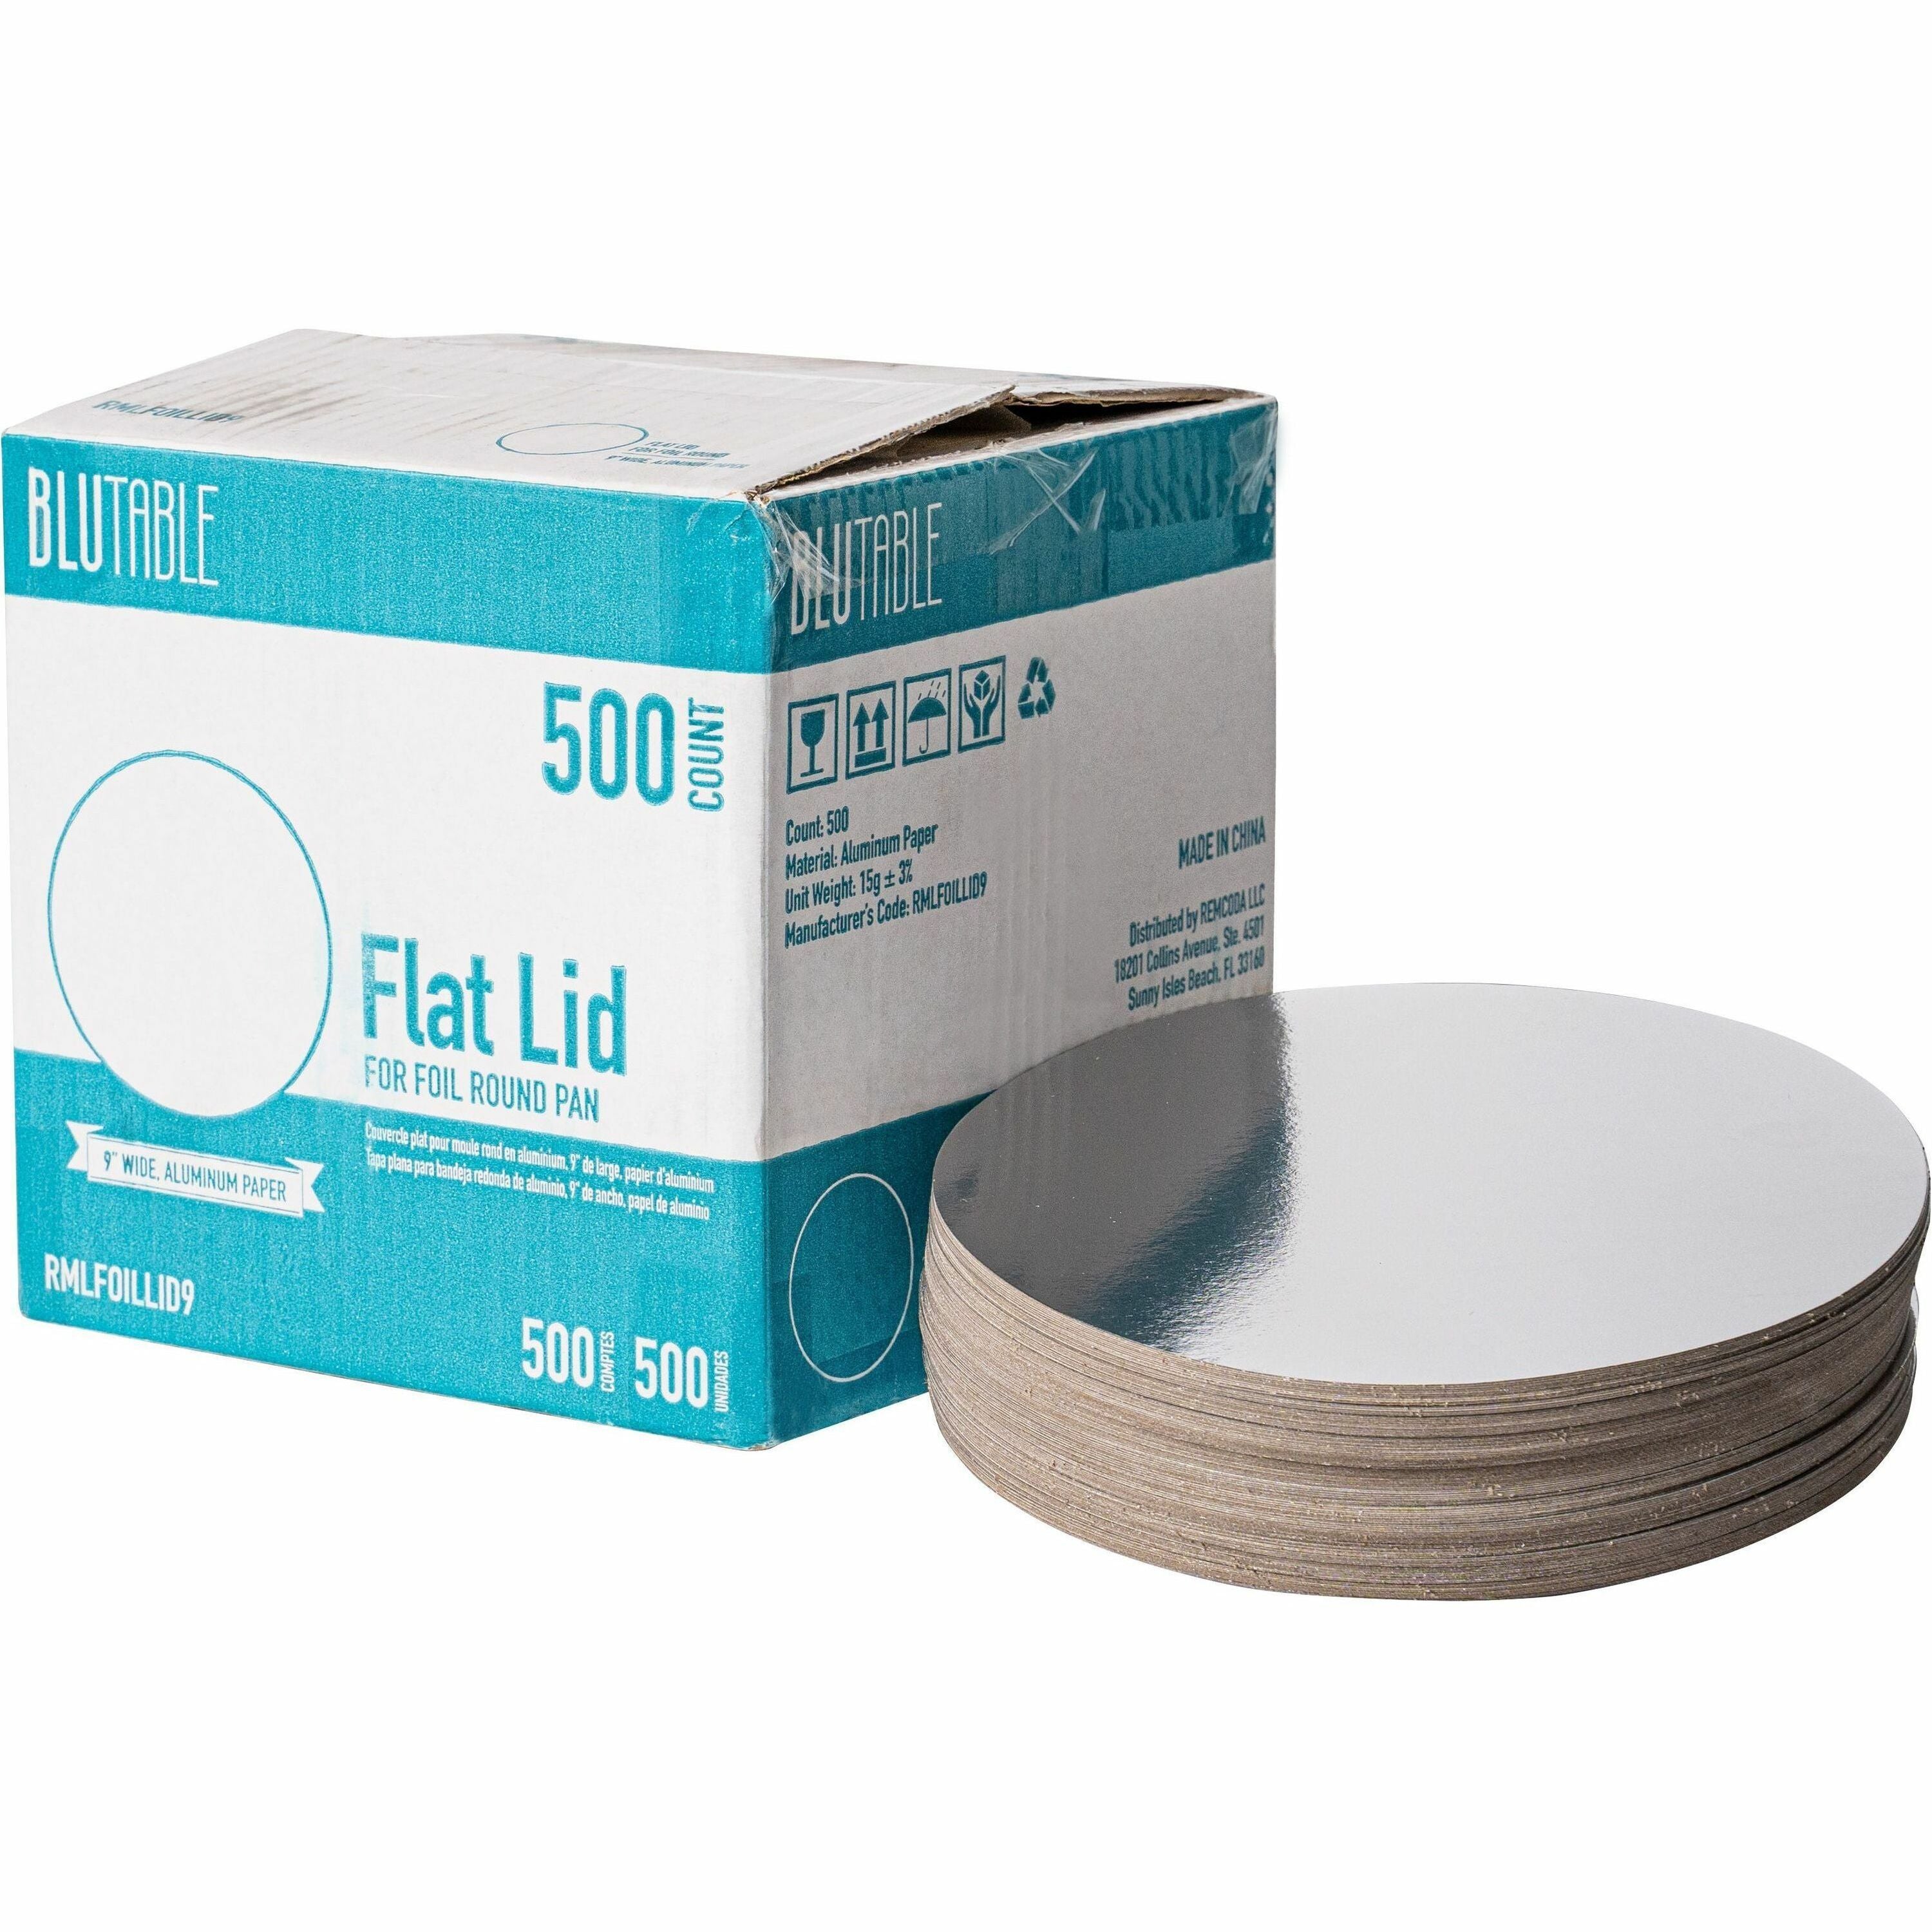 blutable-9-round-foil-pan-flat-board-lids-round-500-carton-white-silver_rmlfoillid9 - 1